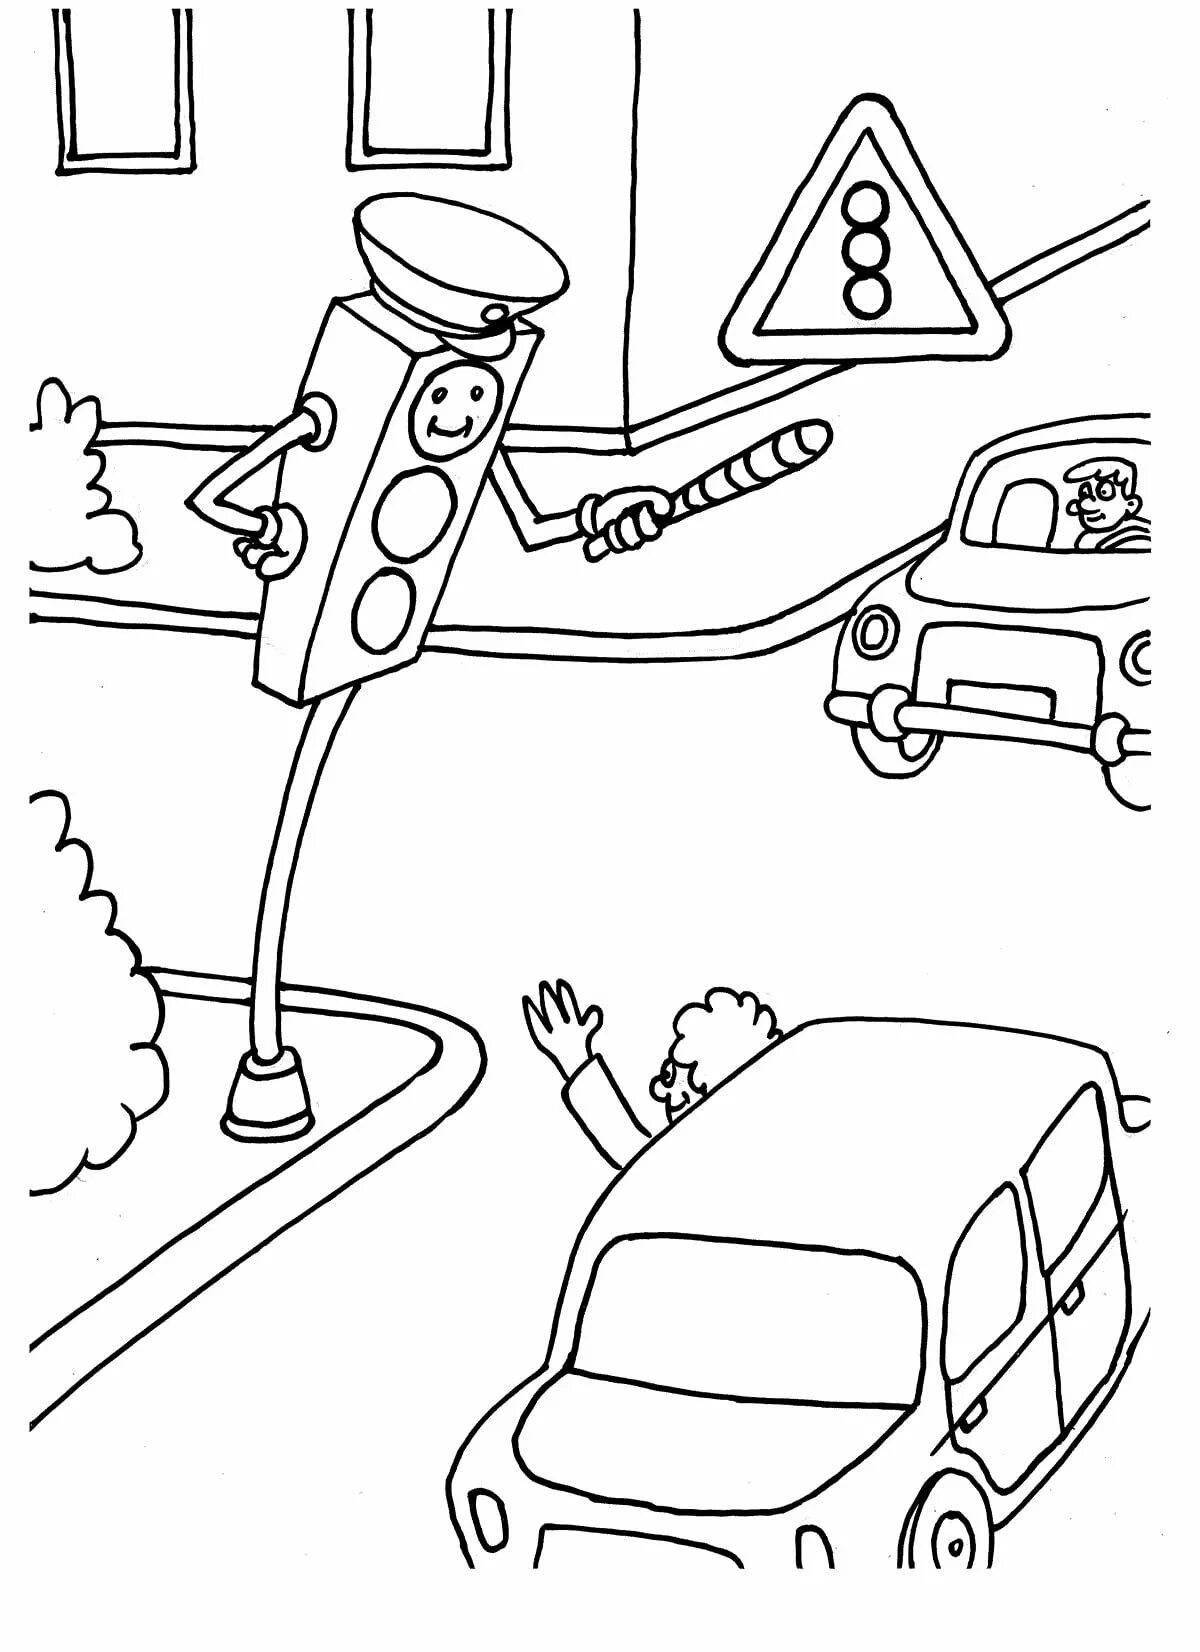 Coloring road signs for schoolchildren